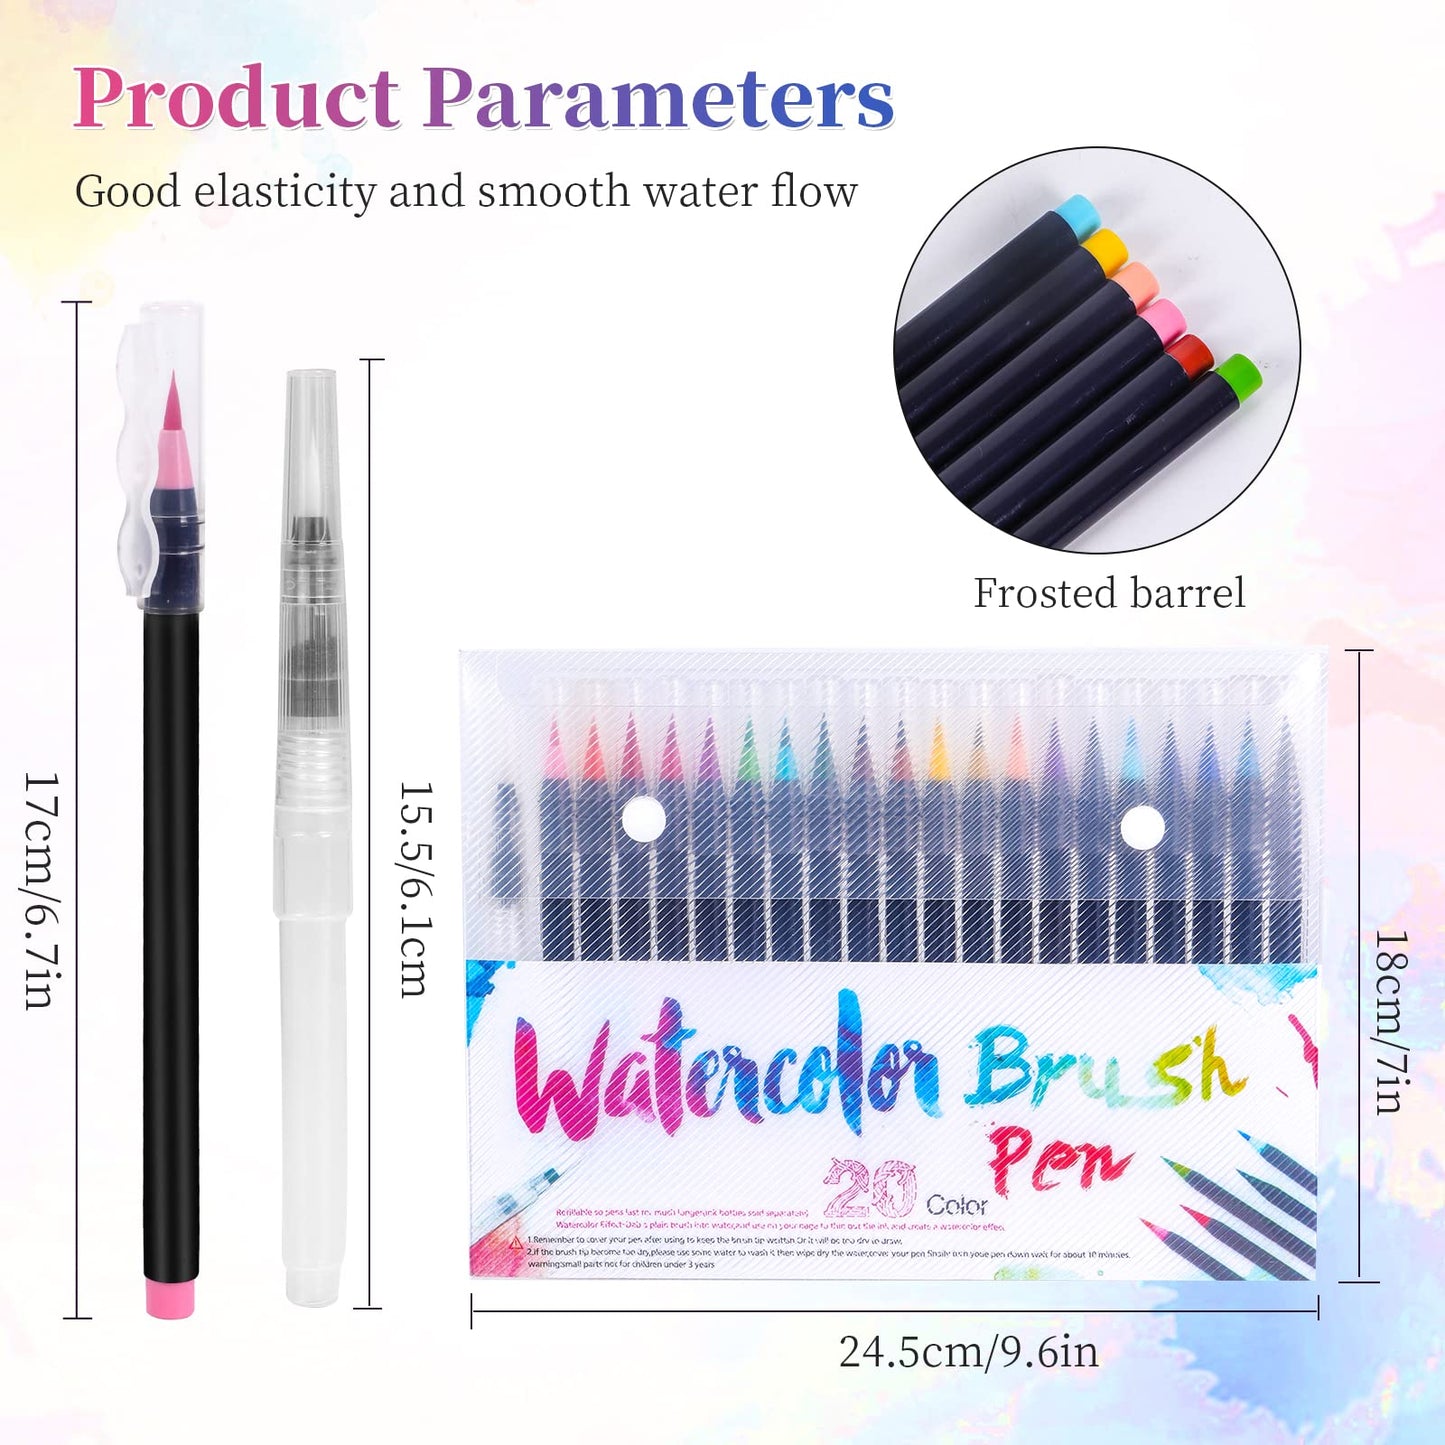 SKY-TOUCH 20 Pieces Brush Pens Set, Water Color Brush Pen Markers Ideal for Calligraphy, Hand Lettering and Drawing Manga Painting and Even Cartoon Sketching Brush